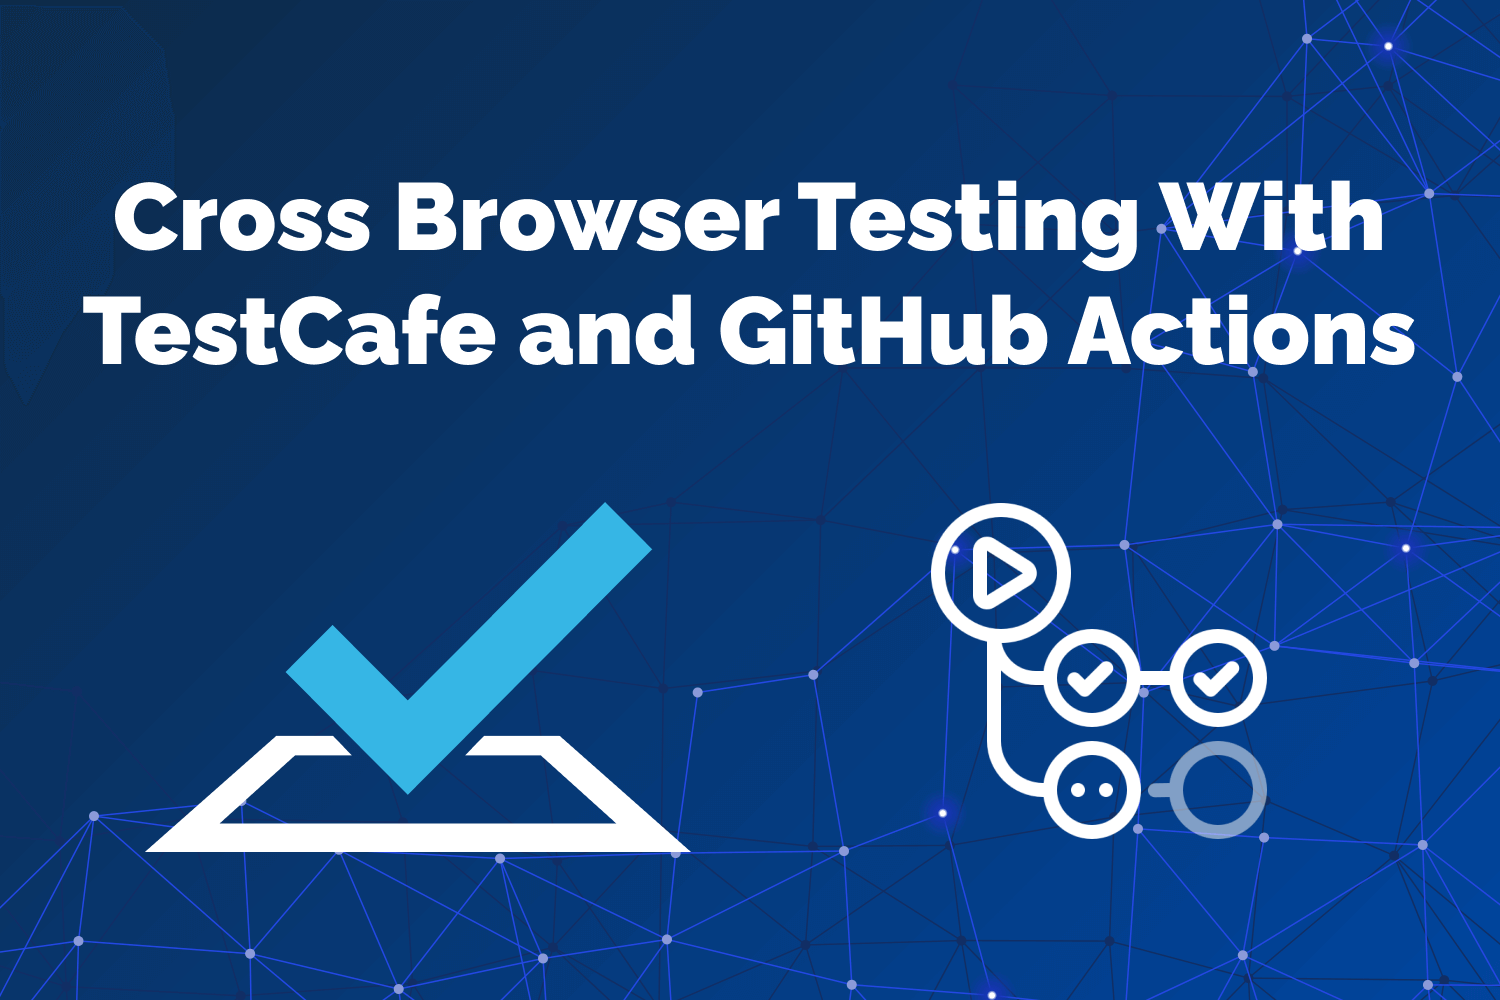 Cross Browser Testing With TestCafe and GitHub Actions